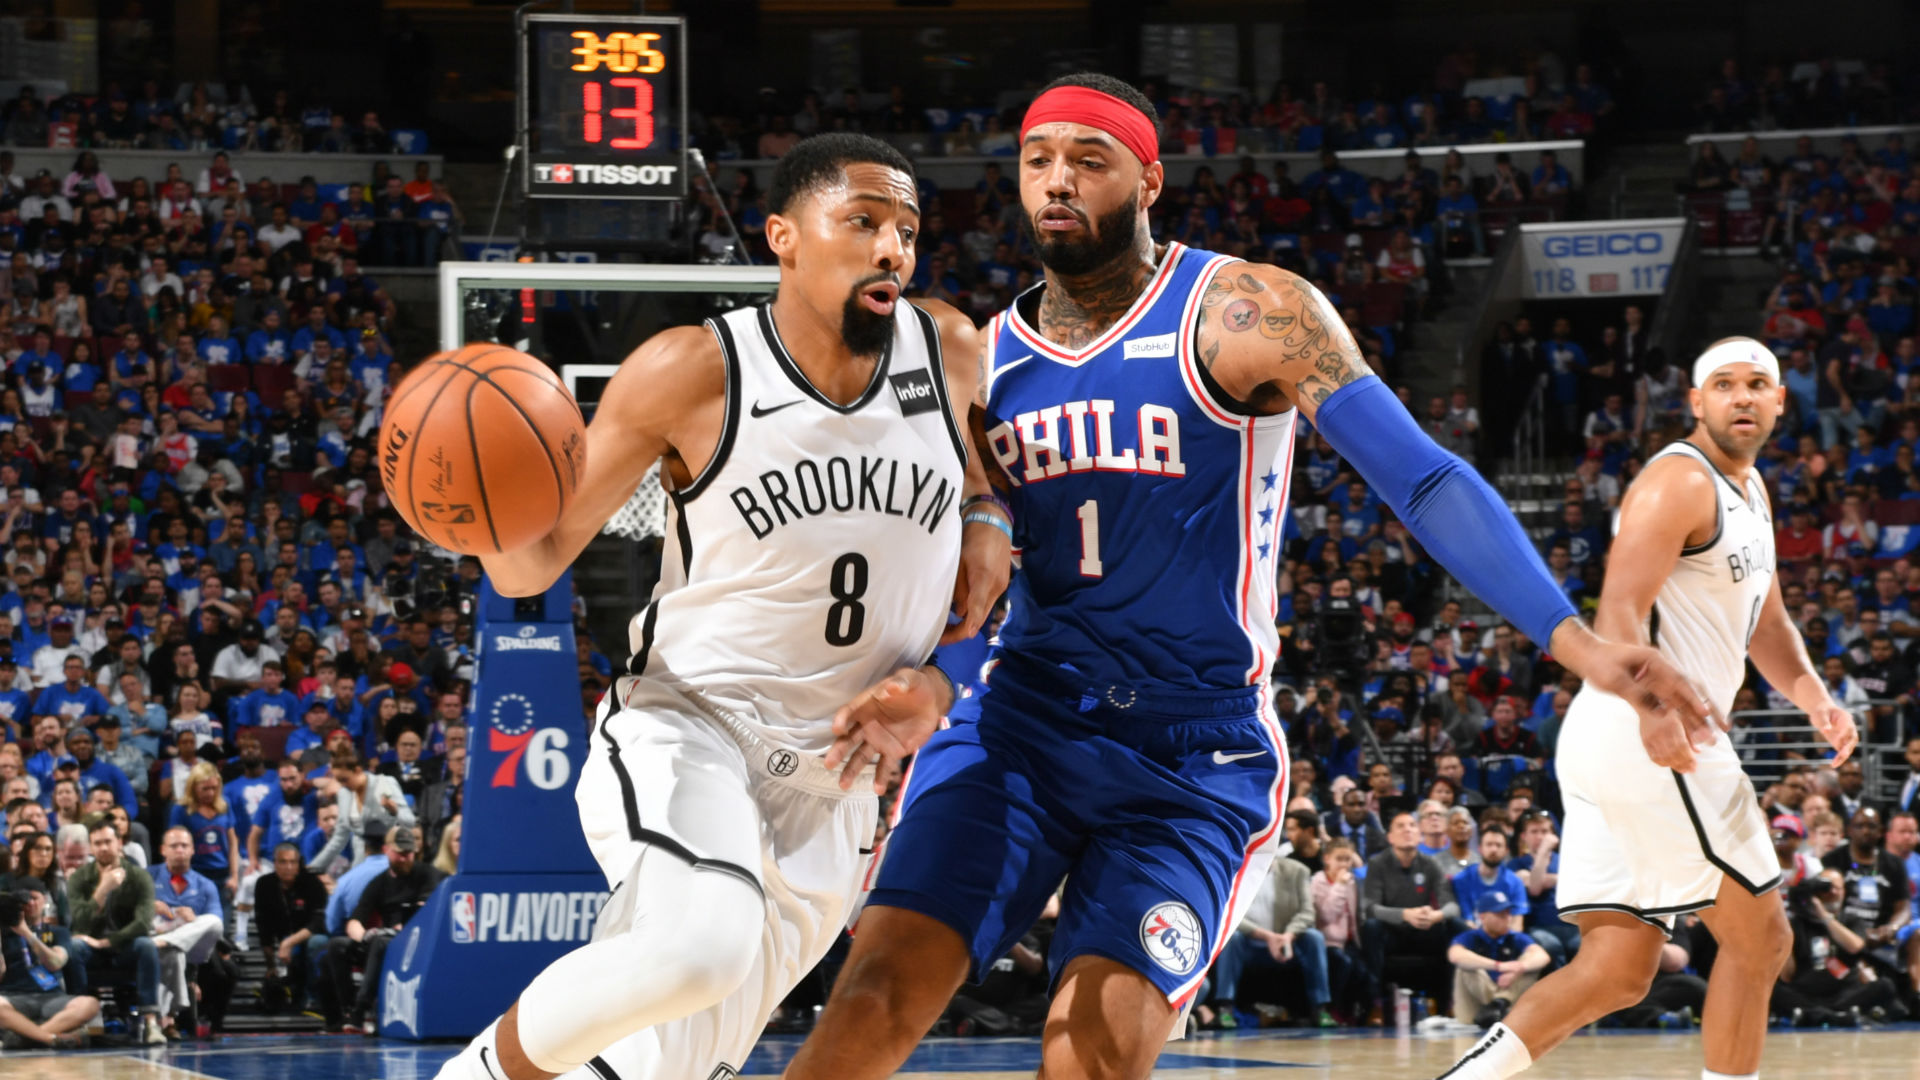 NBA Playoffs 2019 Live updates, scores, highlights from 76ers vs. Nets